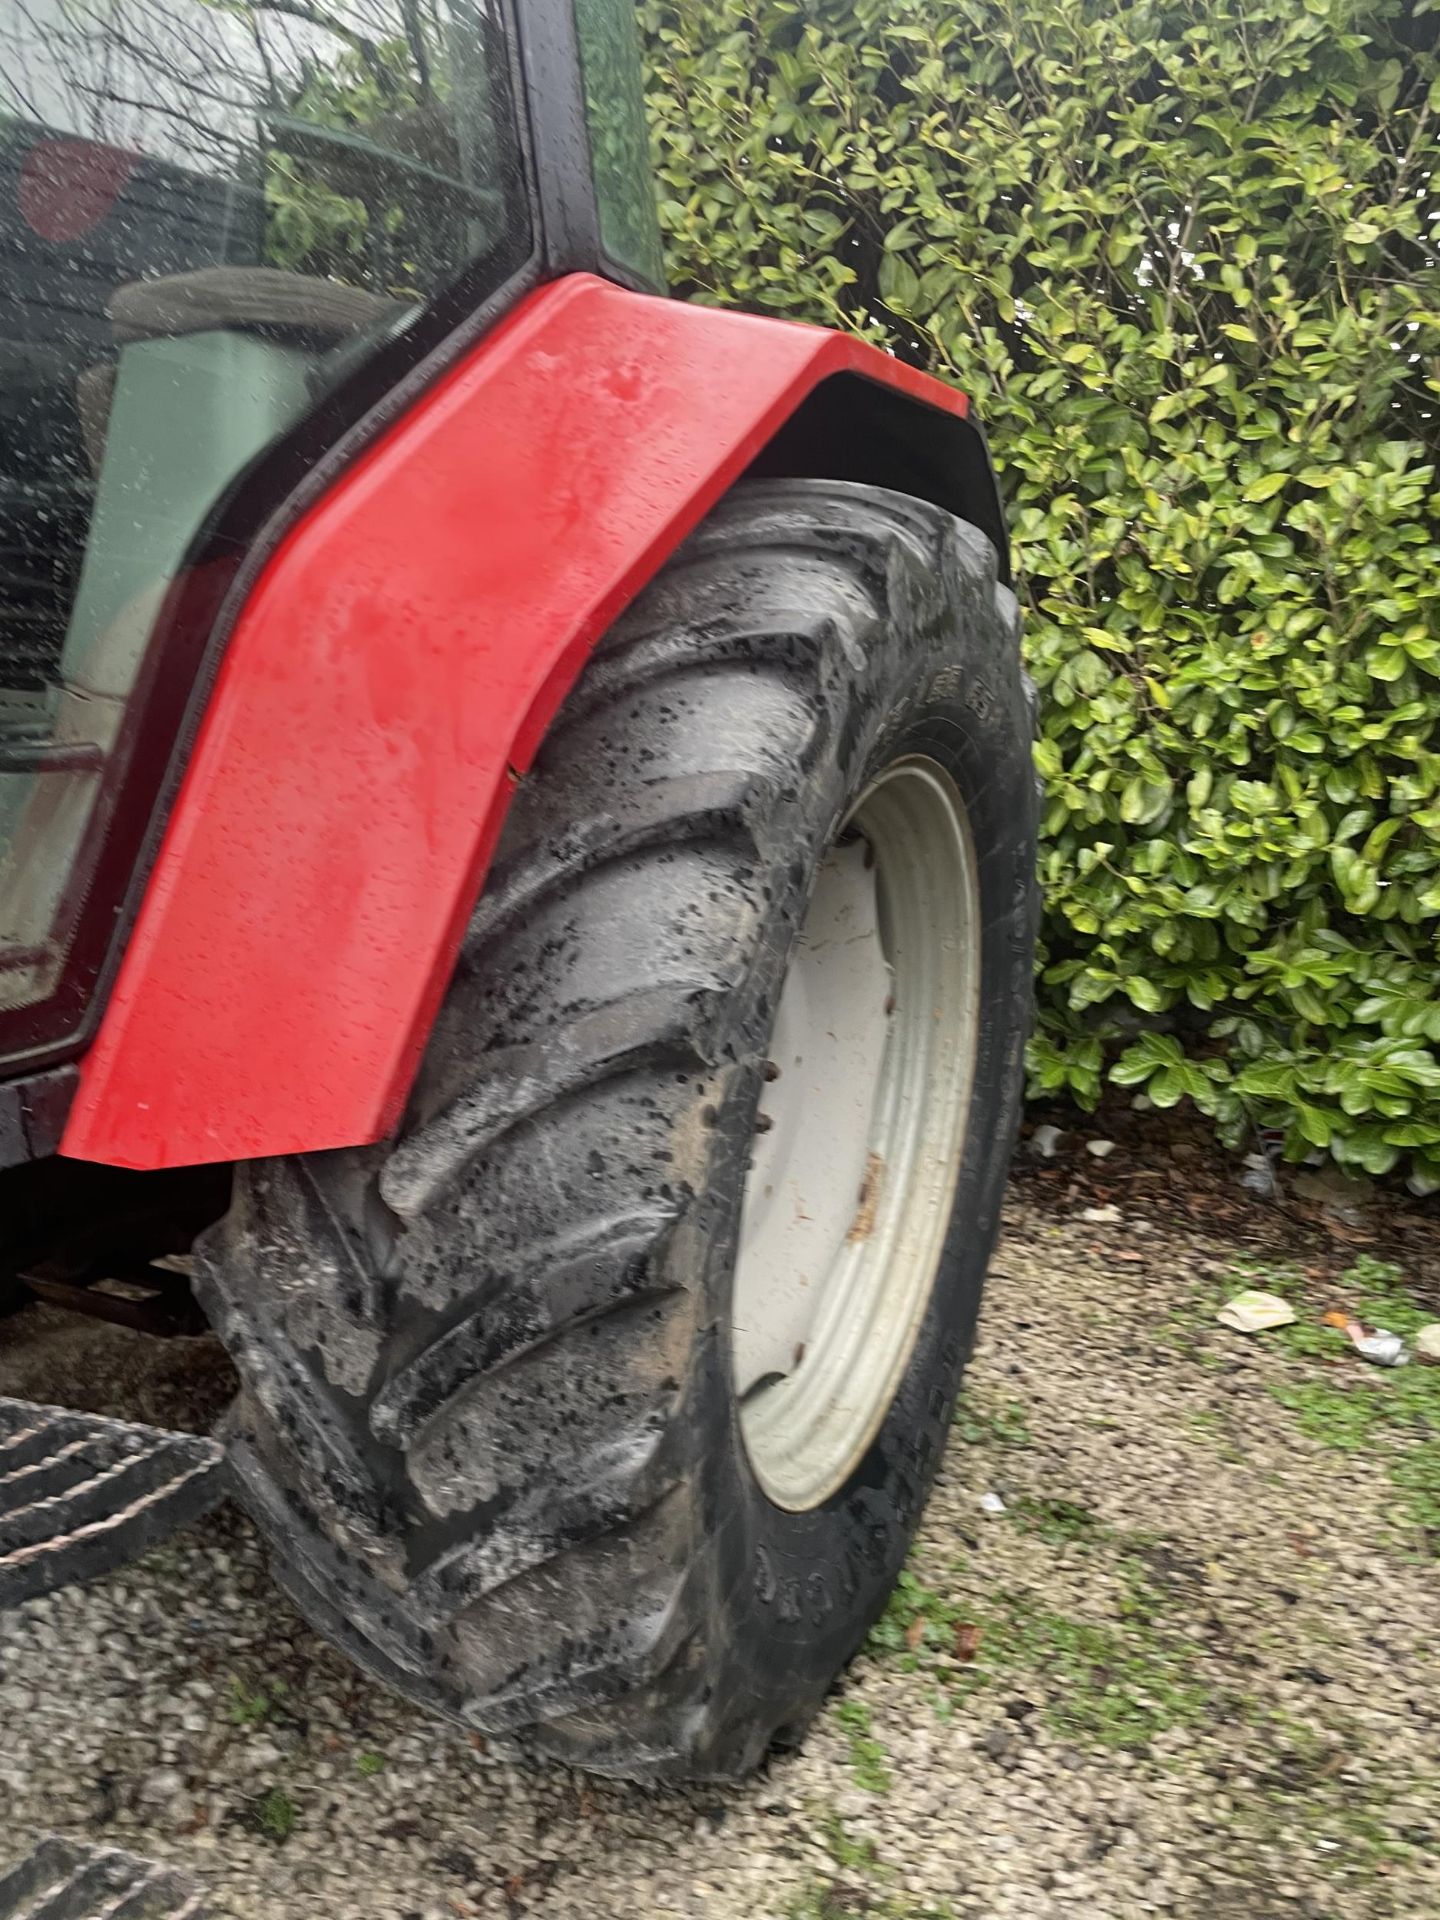 A MASSEY FERGUSON 6160 DYNASHIFT TRACTOR N186 TNT 10865 HOURS ON THE CLOCK NO VAT - Image 3 of 7